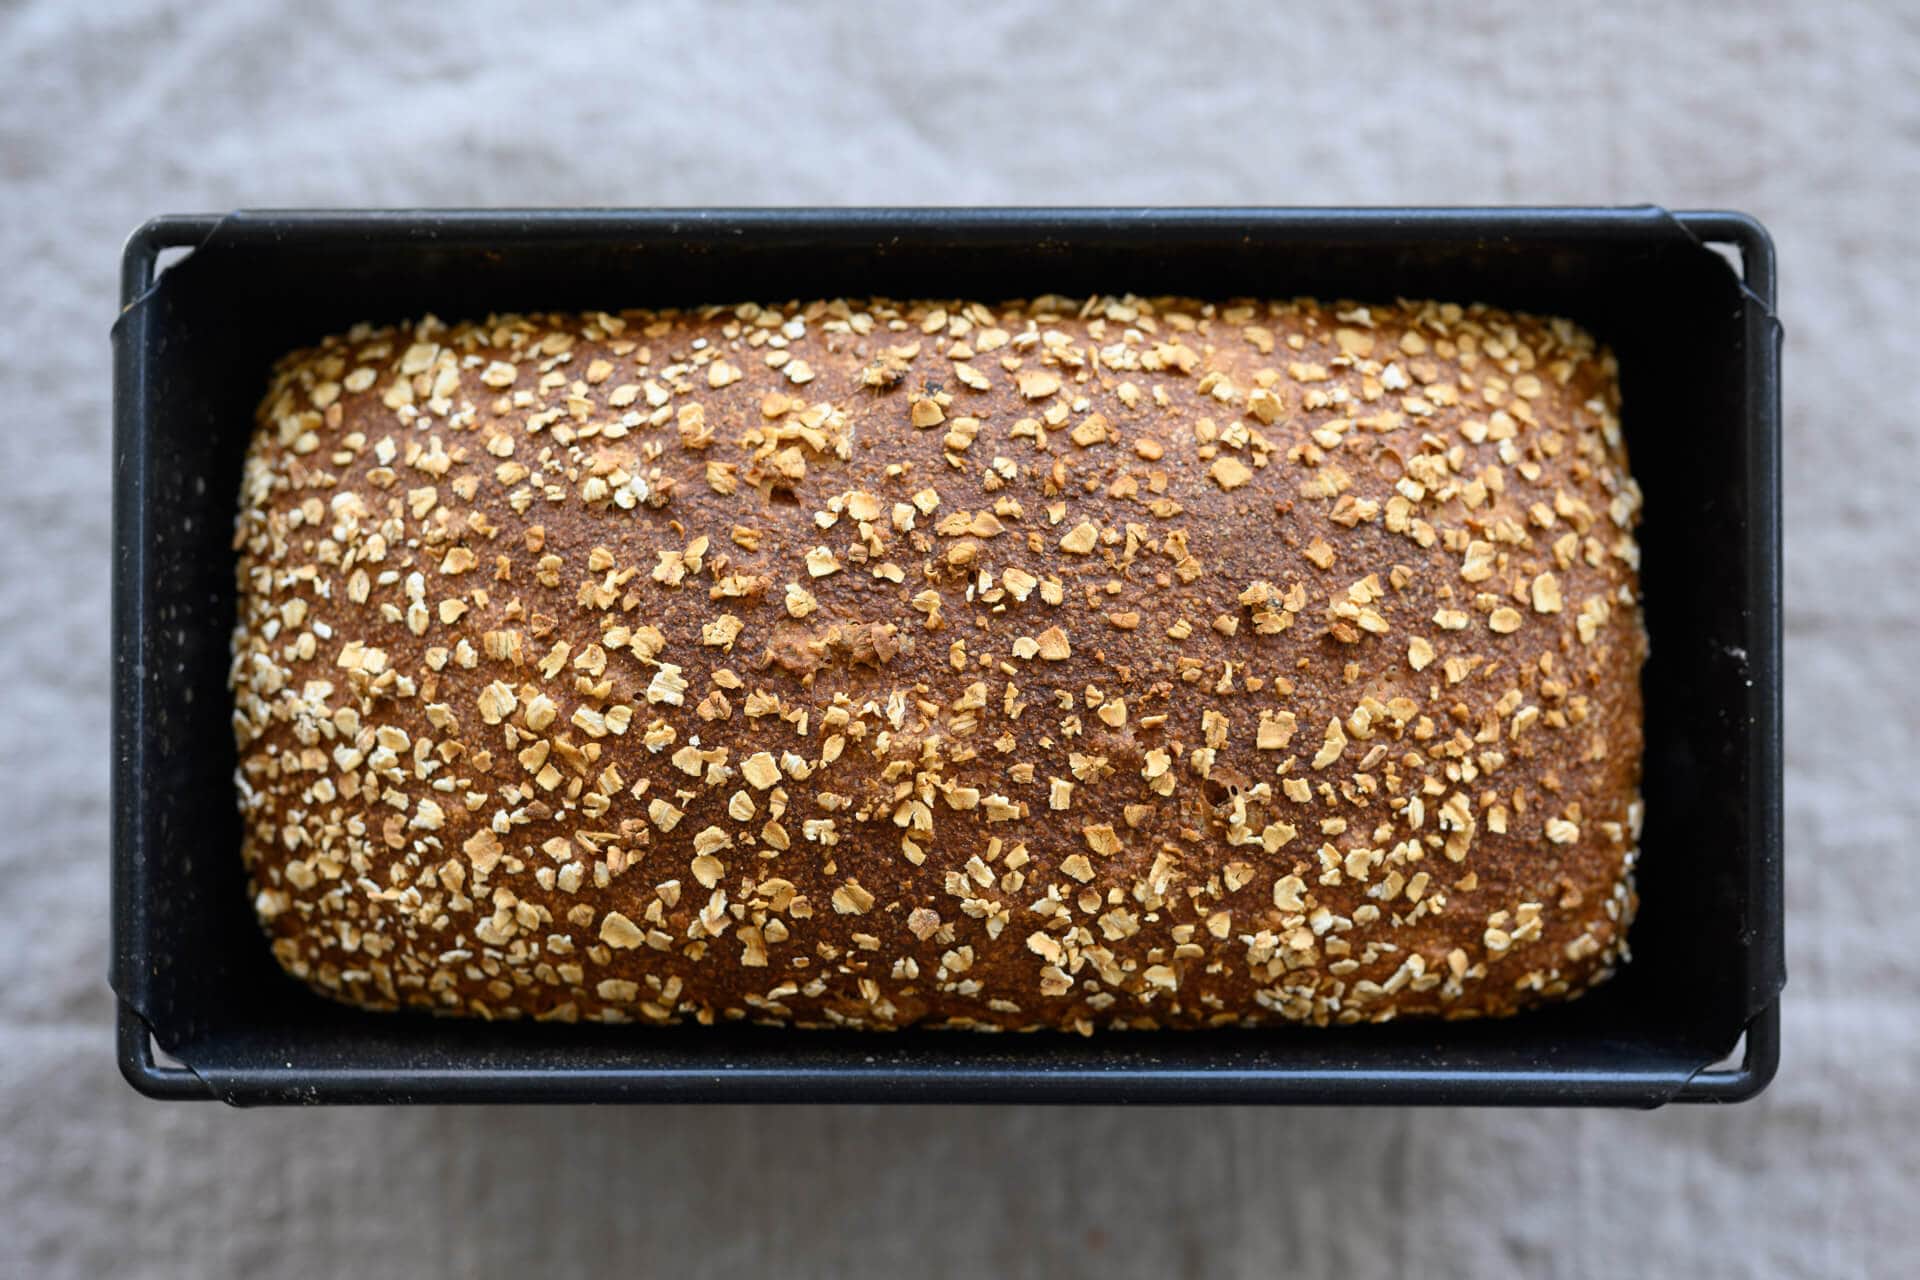 https://www.theperfectloaf.com/wp-content/uploads/2019/07/theperfectloaf-honey-whole-wheat-and-barley-pan-loaf-10.jpg